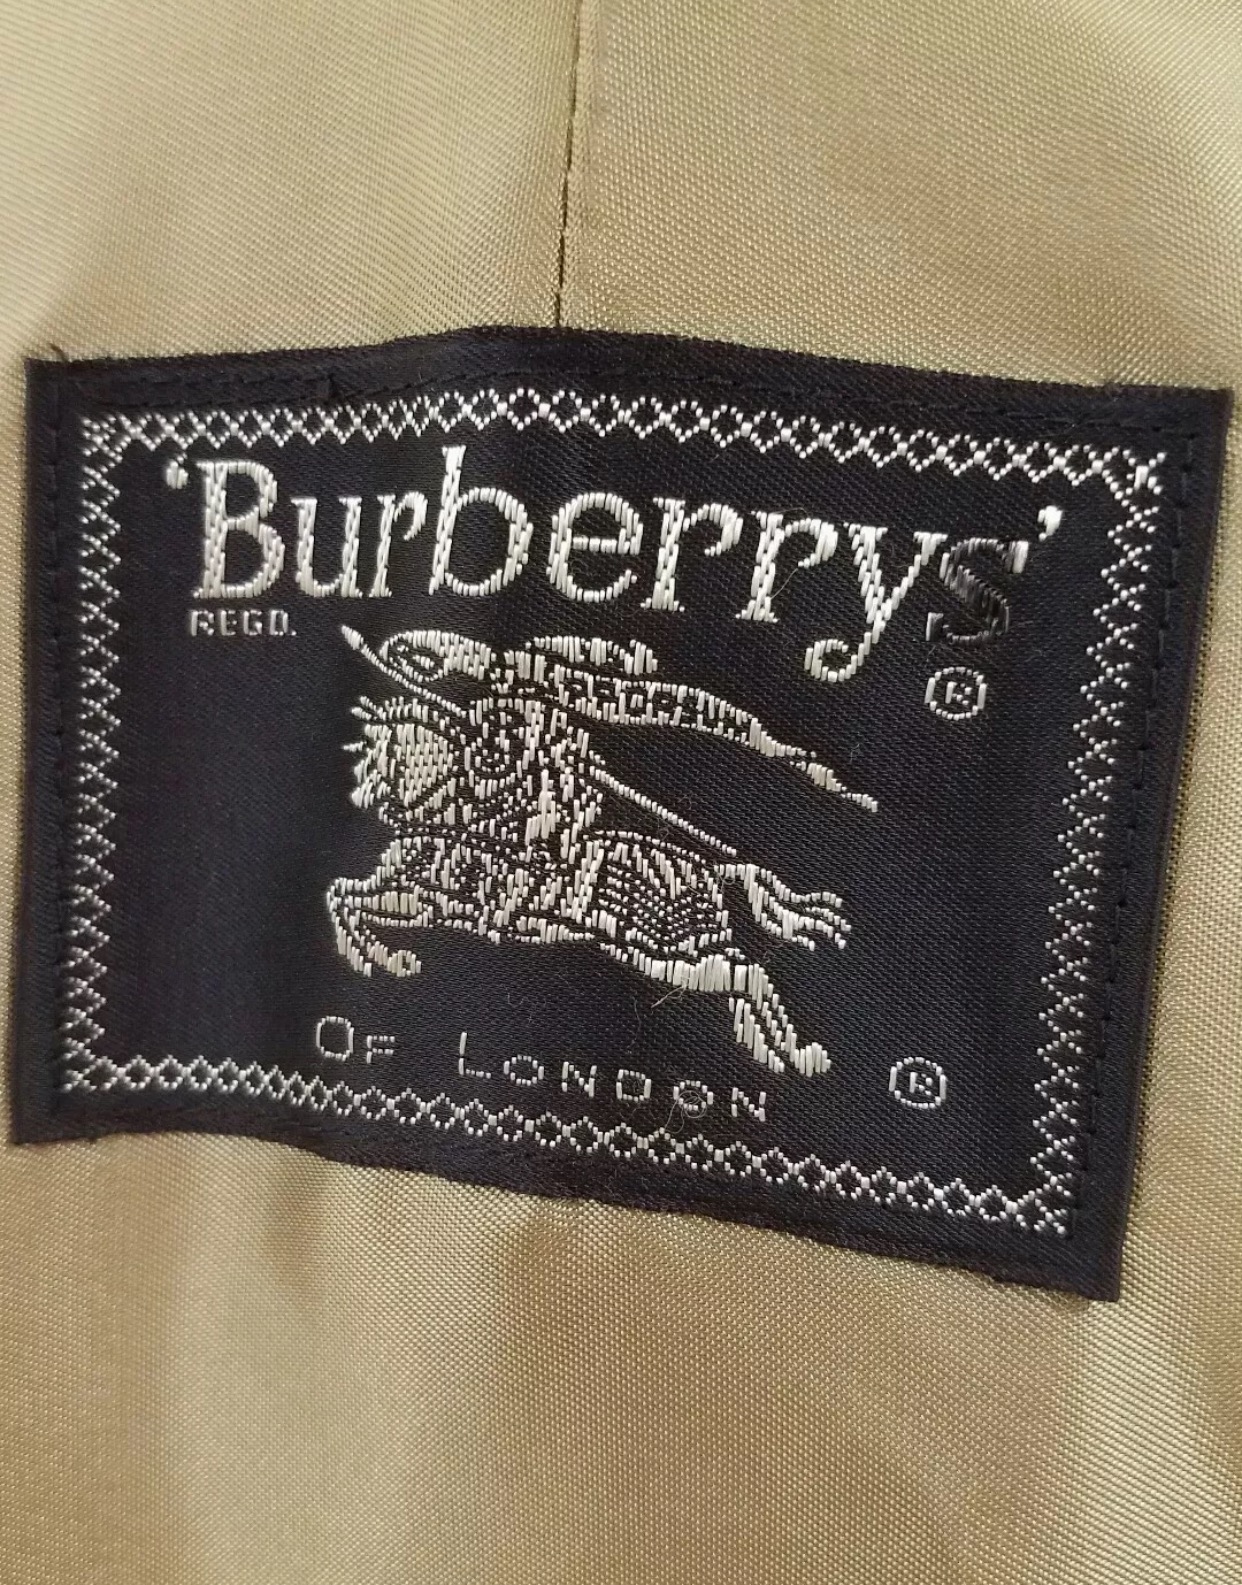 vintage burberry buttons